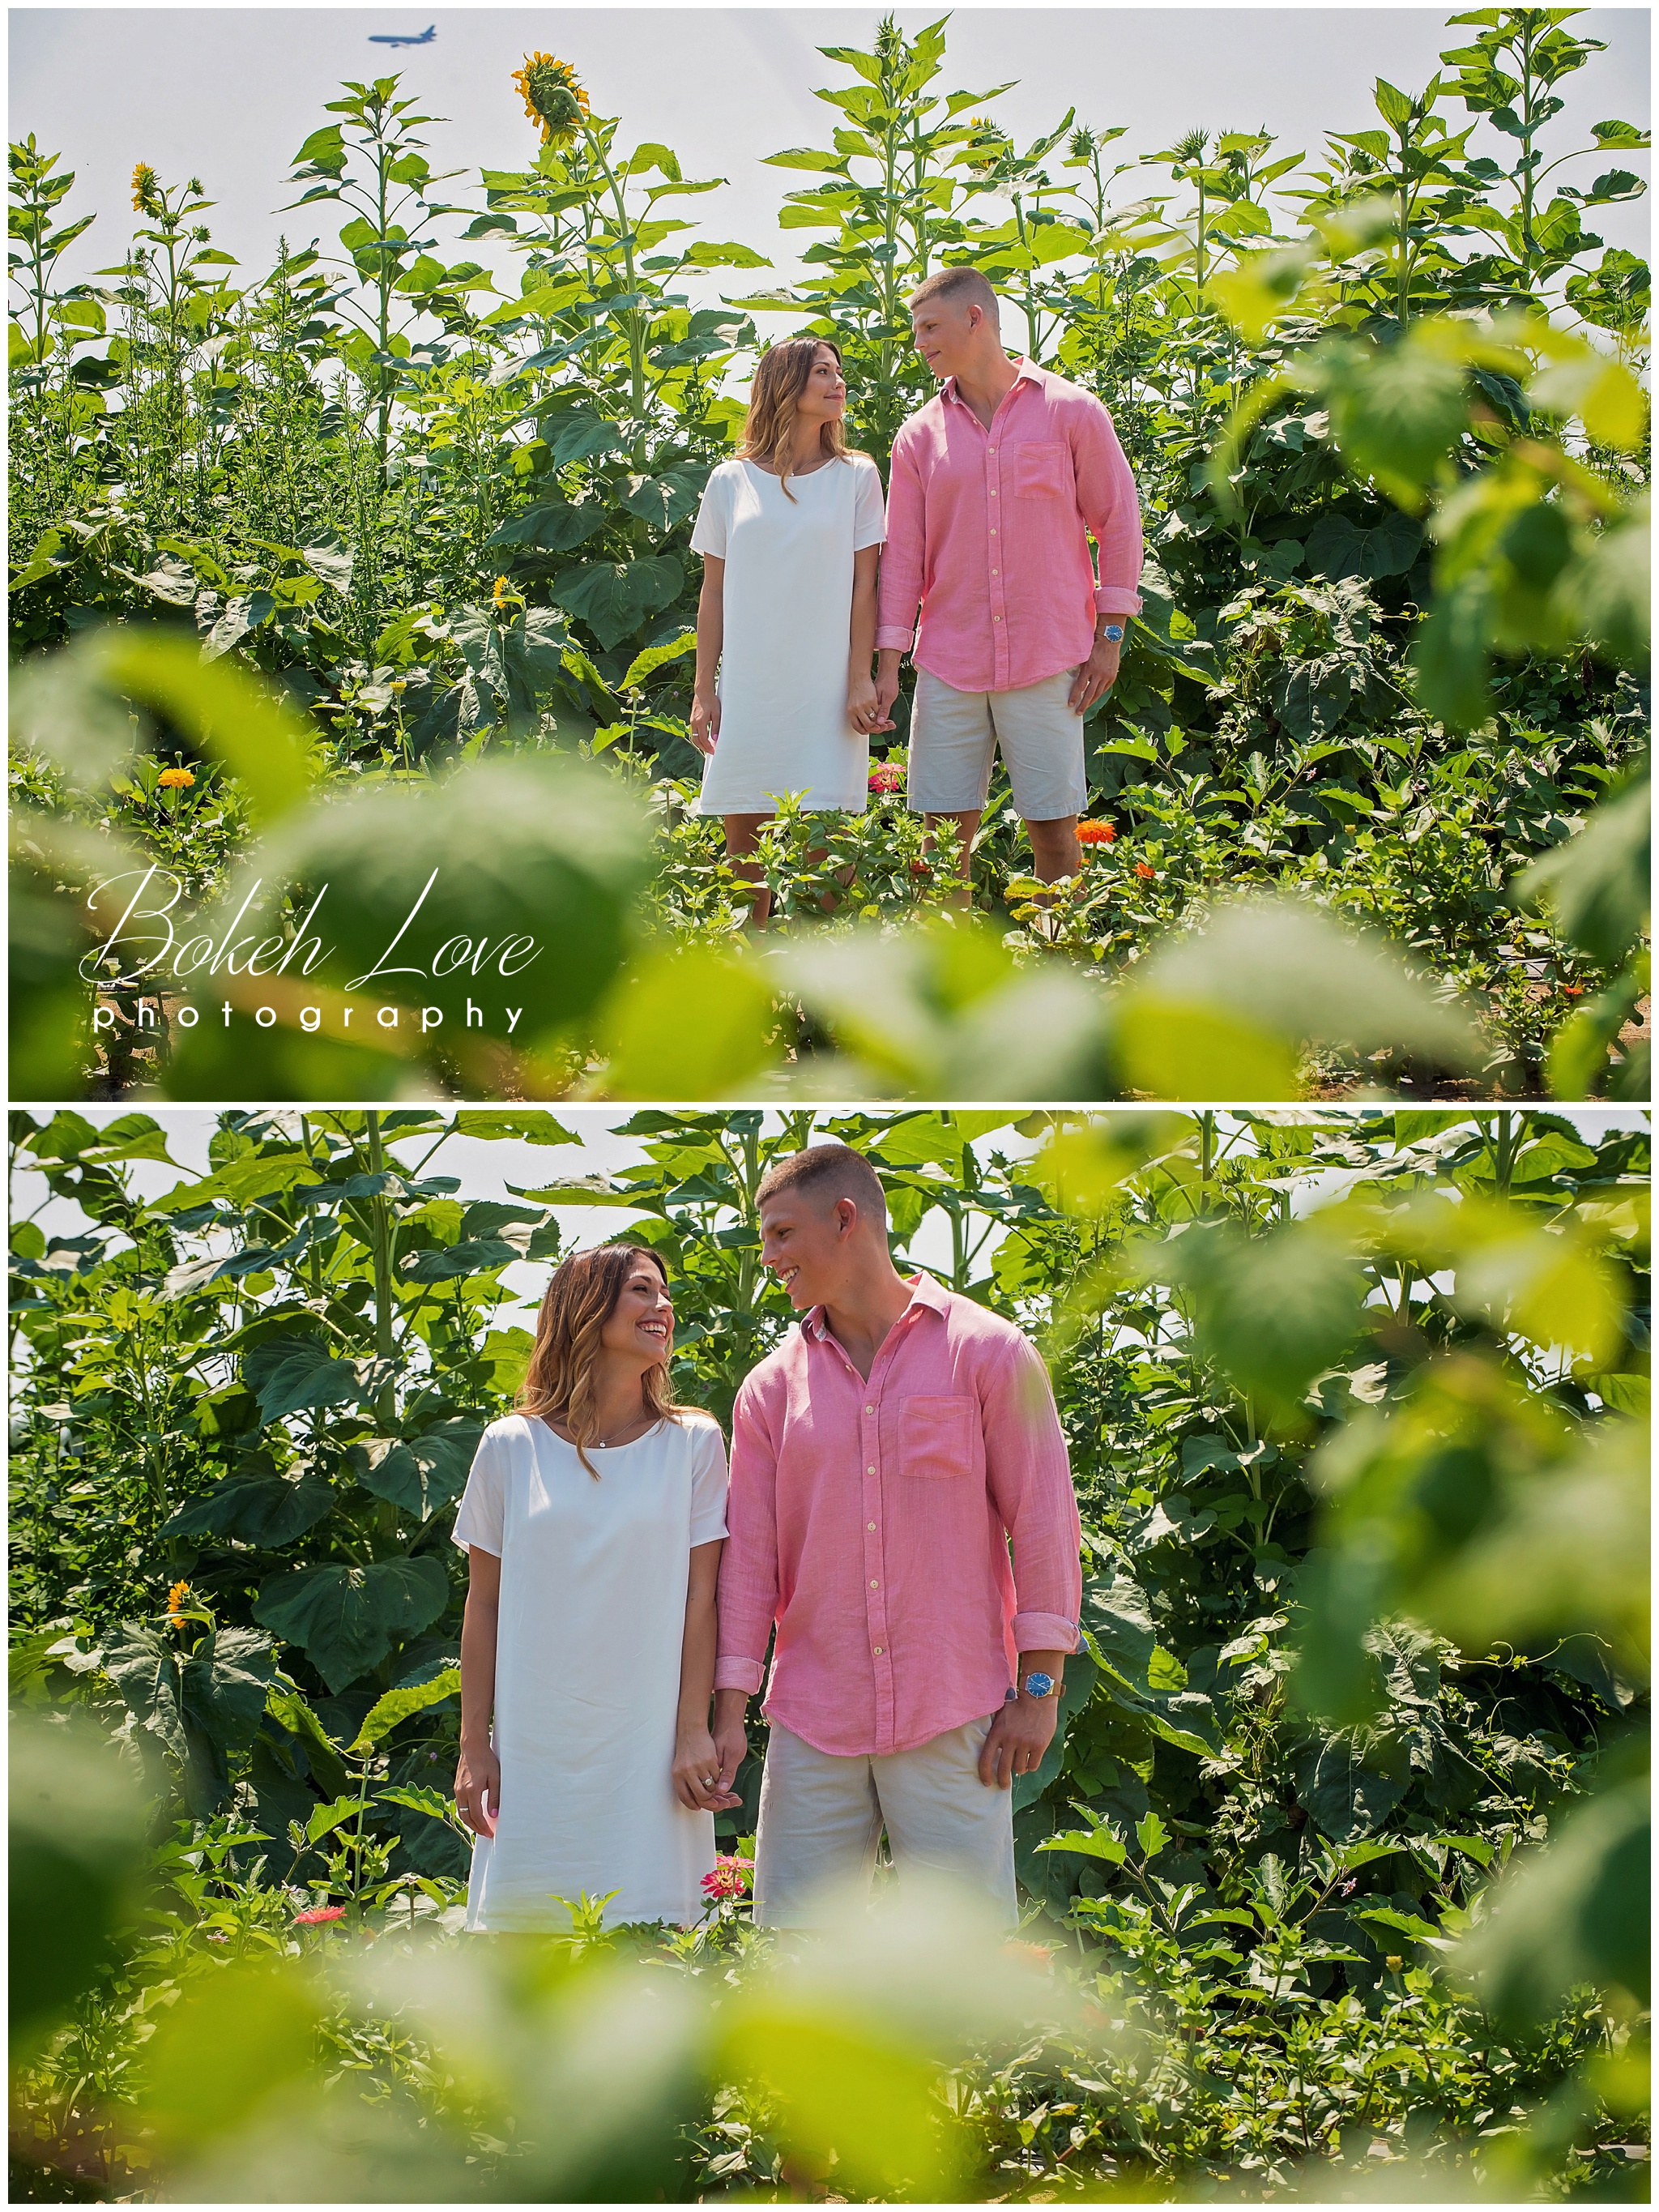 Bokeh Love Photography, Johnsons Locust Hall Farm Engagement Session, South Jersey Engagement Photographer, South Jersey Wedding Photographer